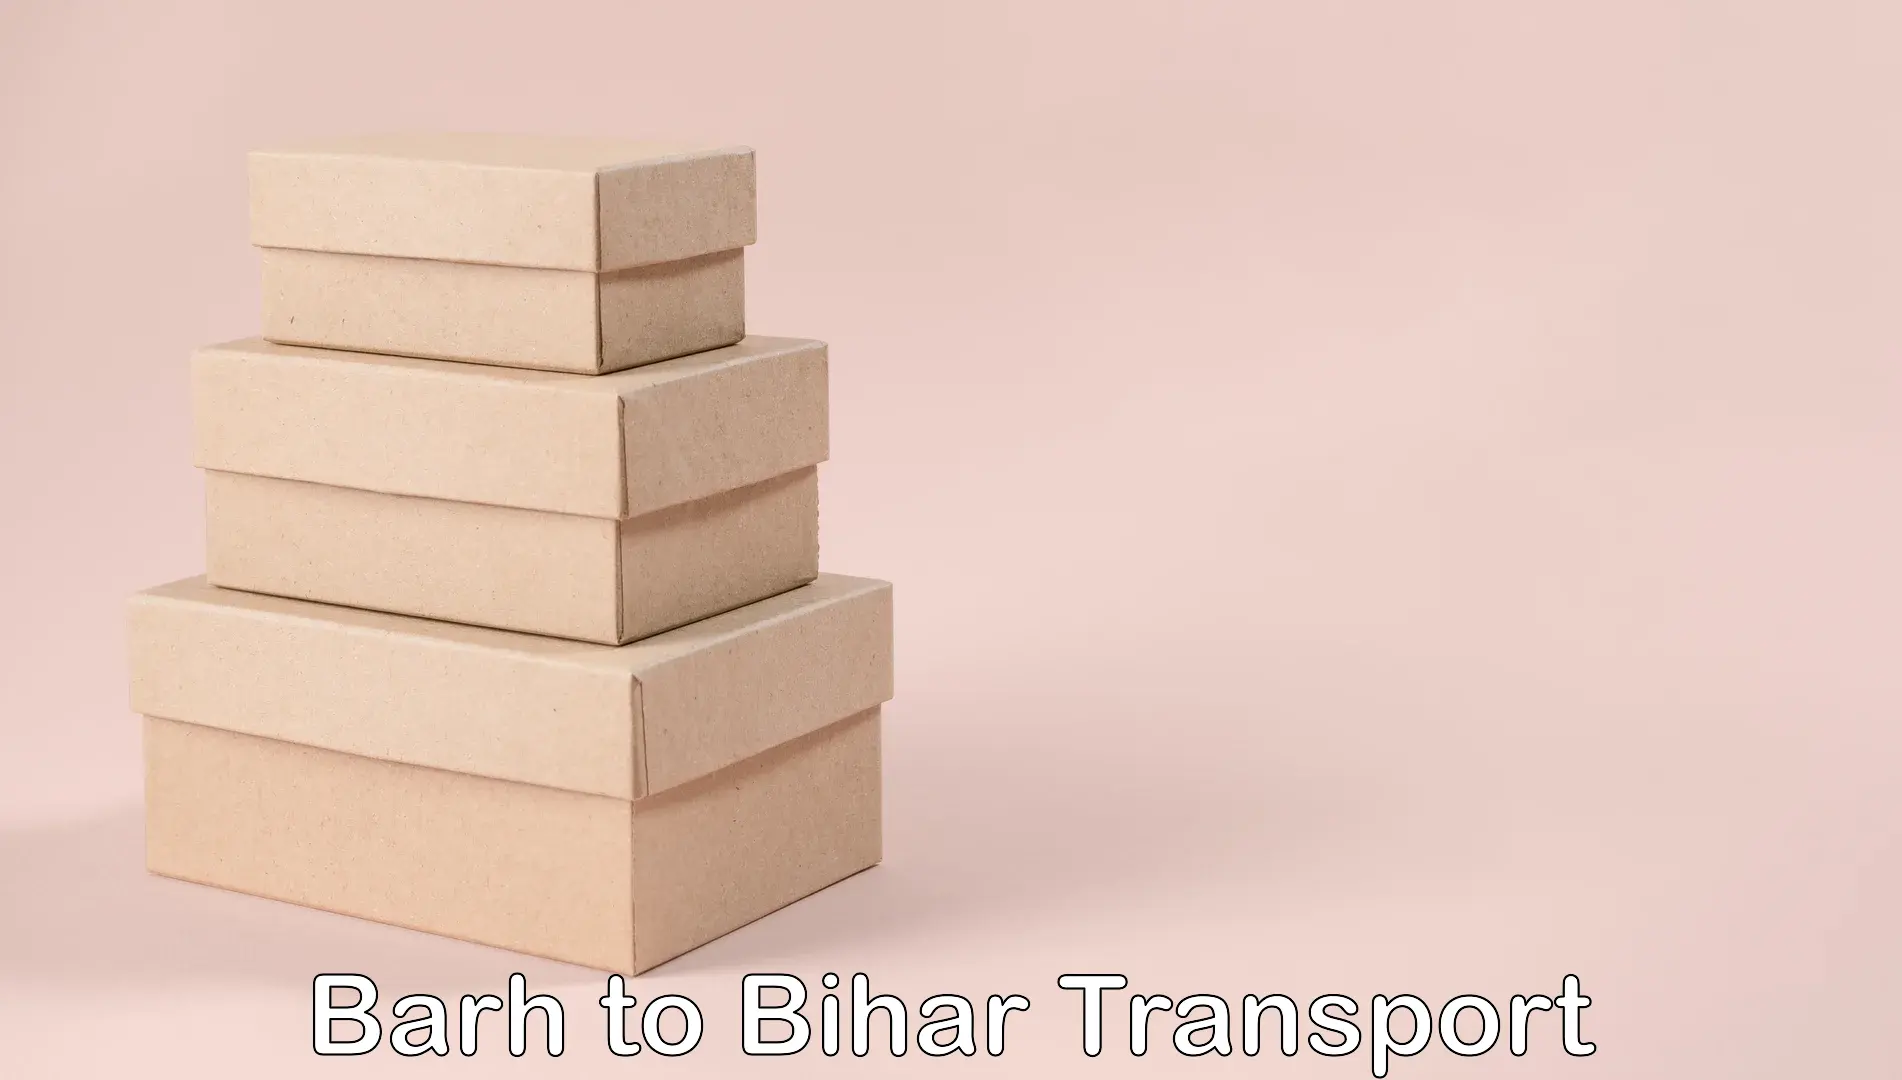 Transport shared services Barh to Biraul